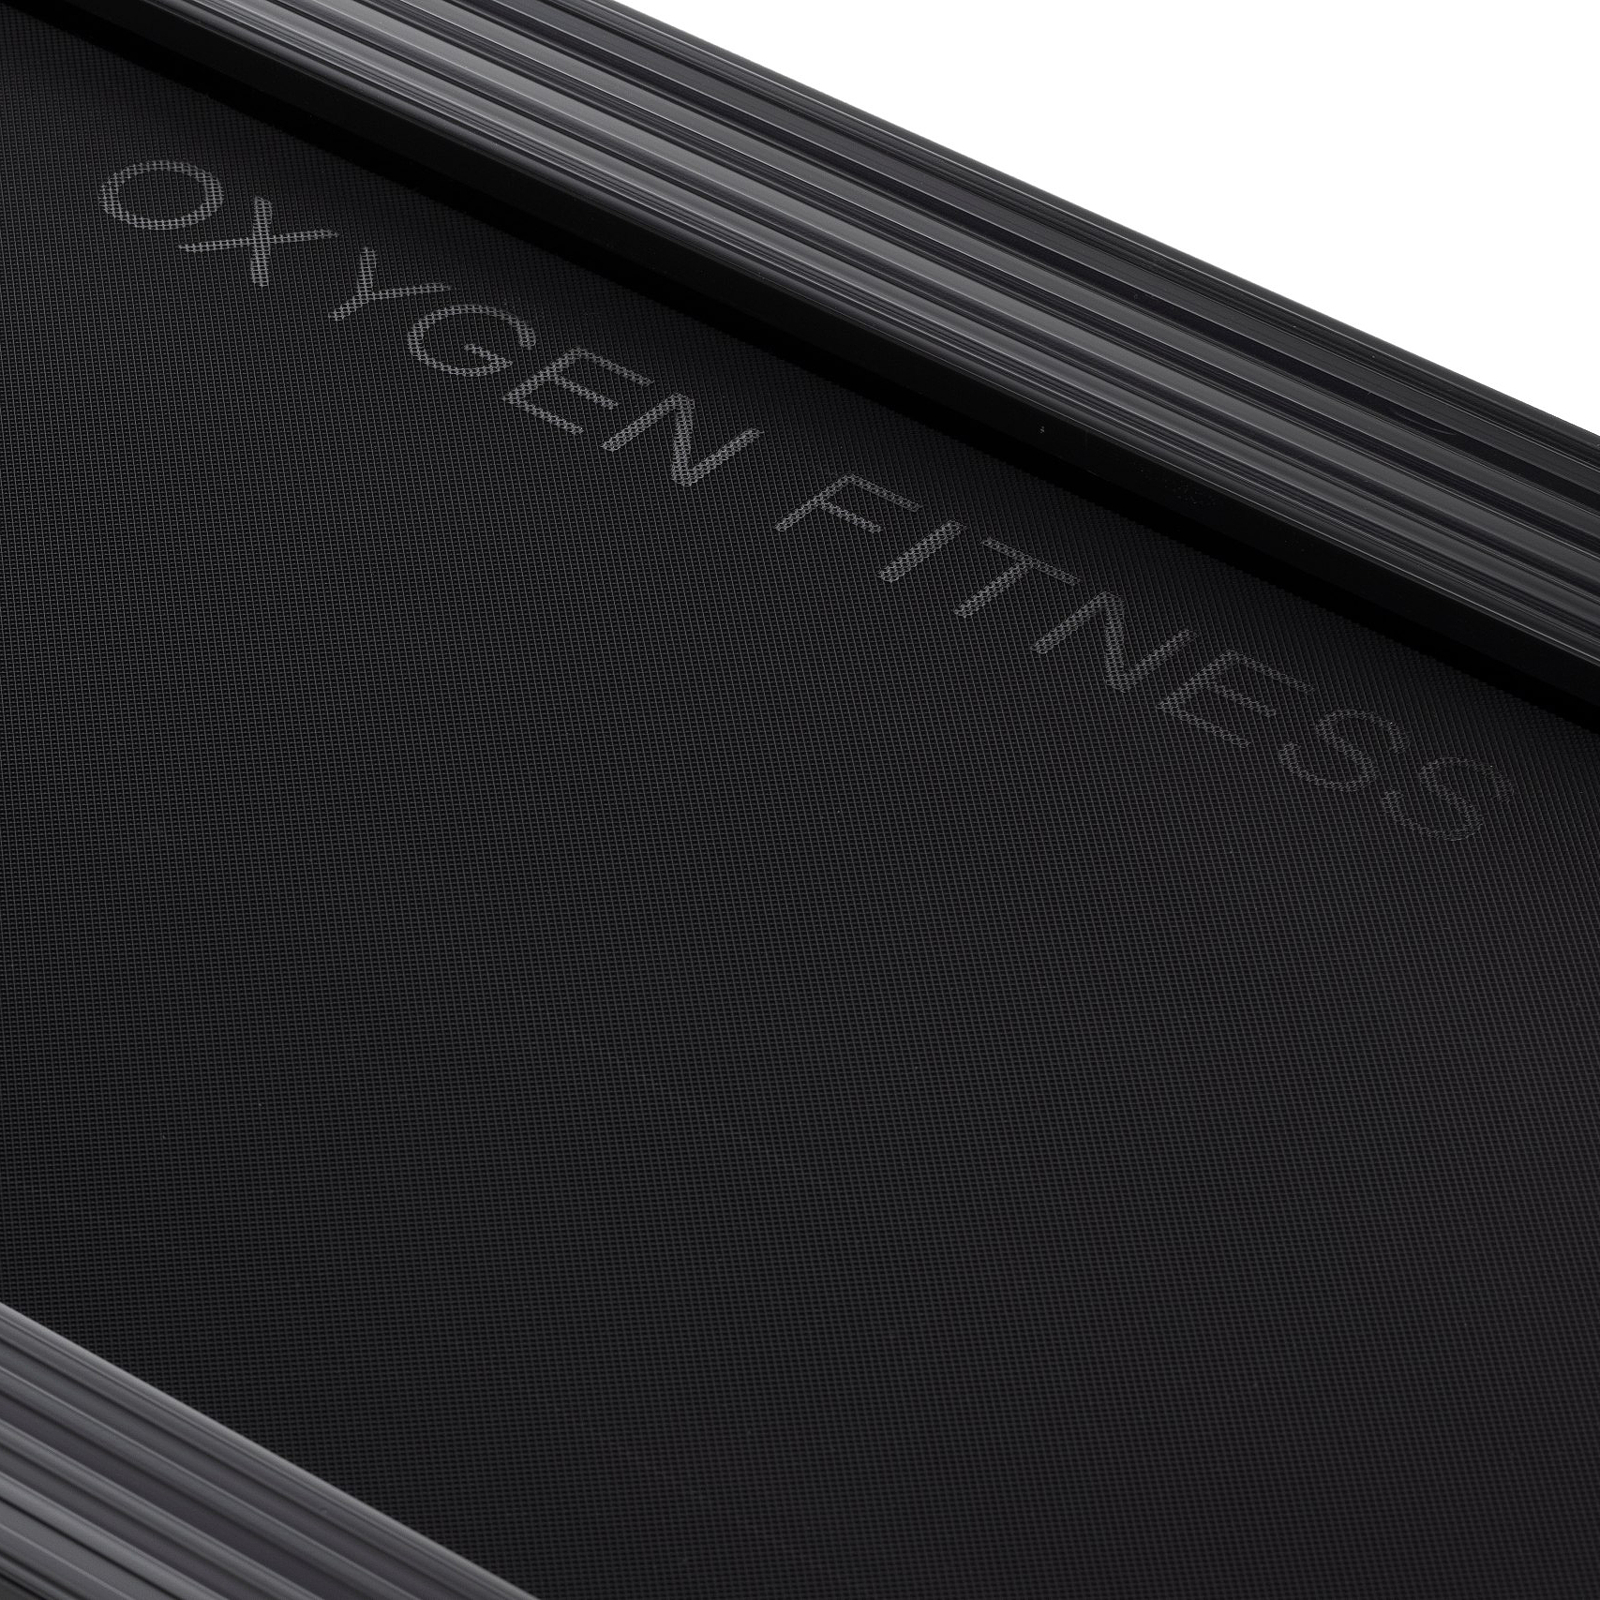 OXYGEN FITNESS ELISION preview 34